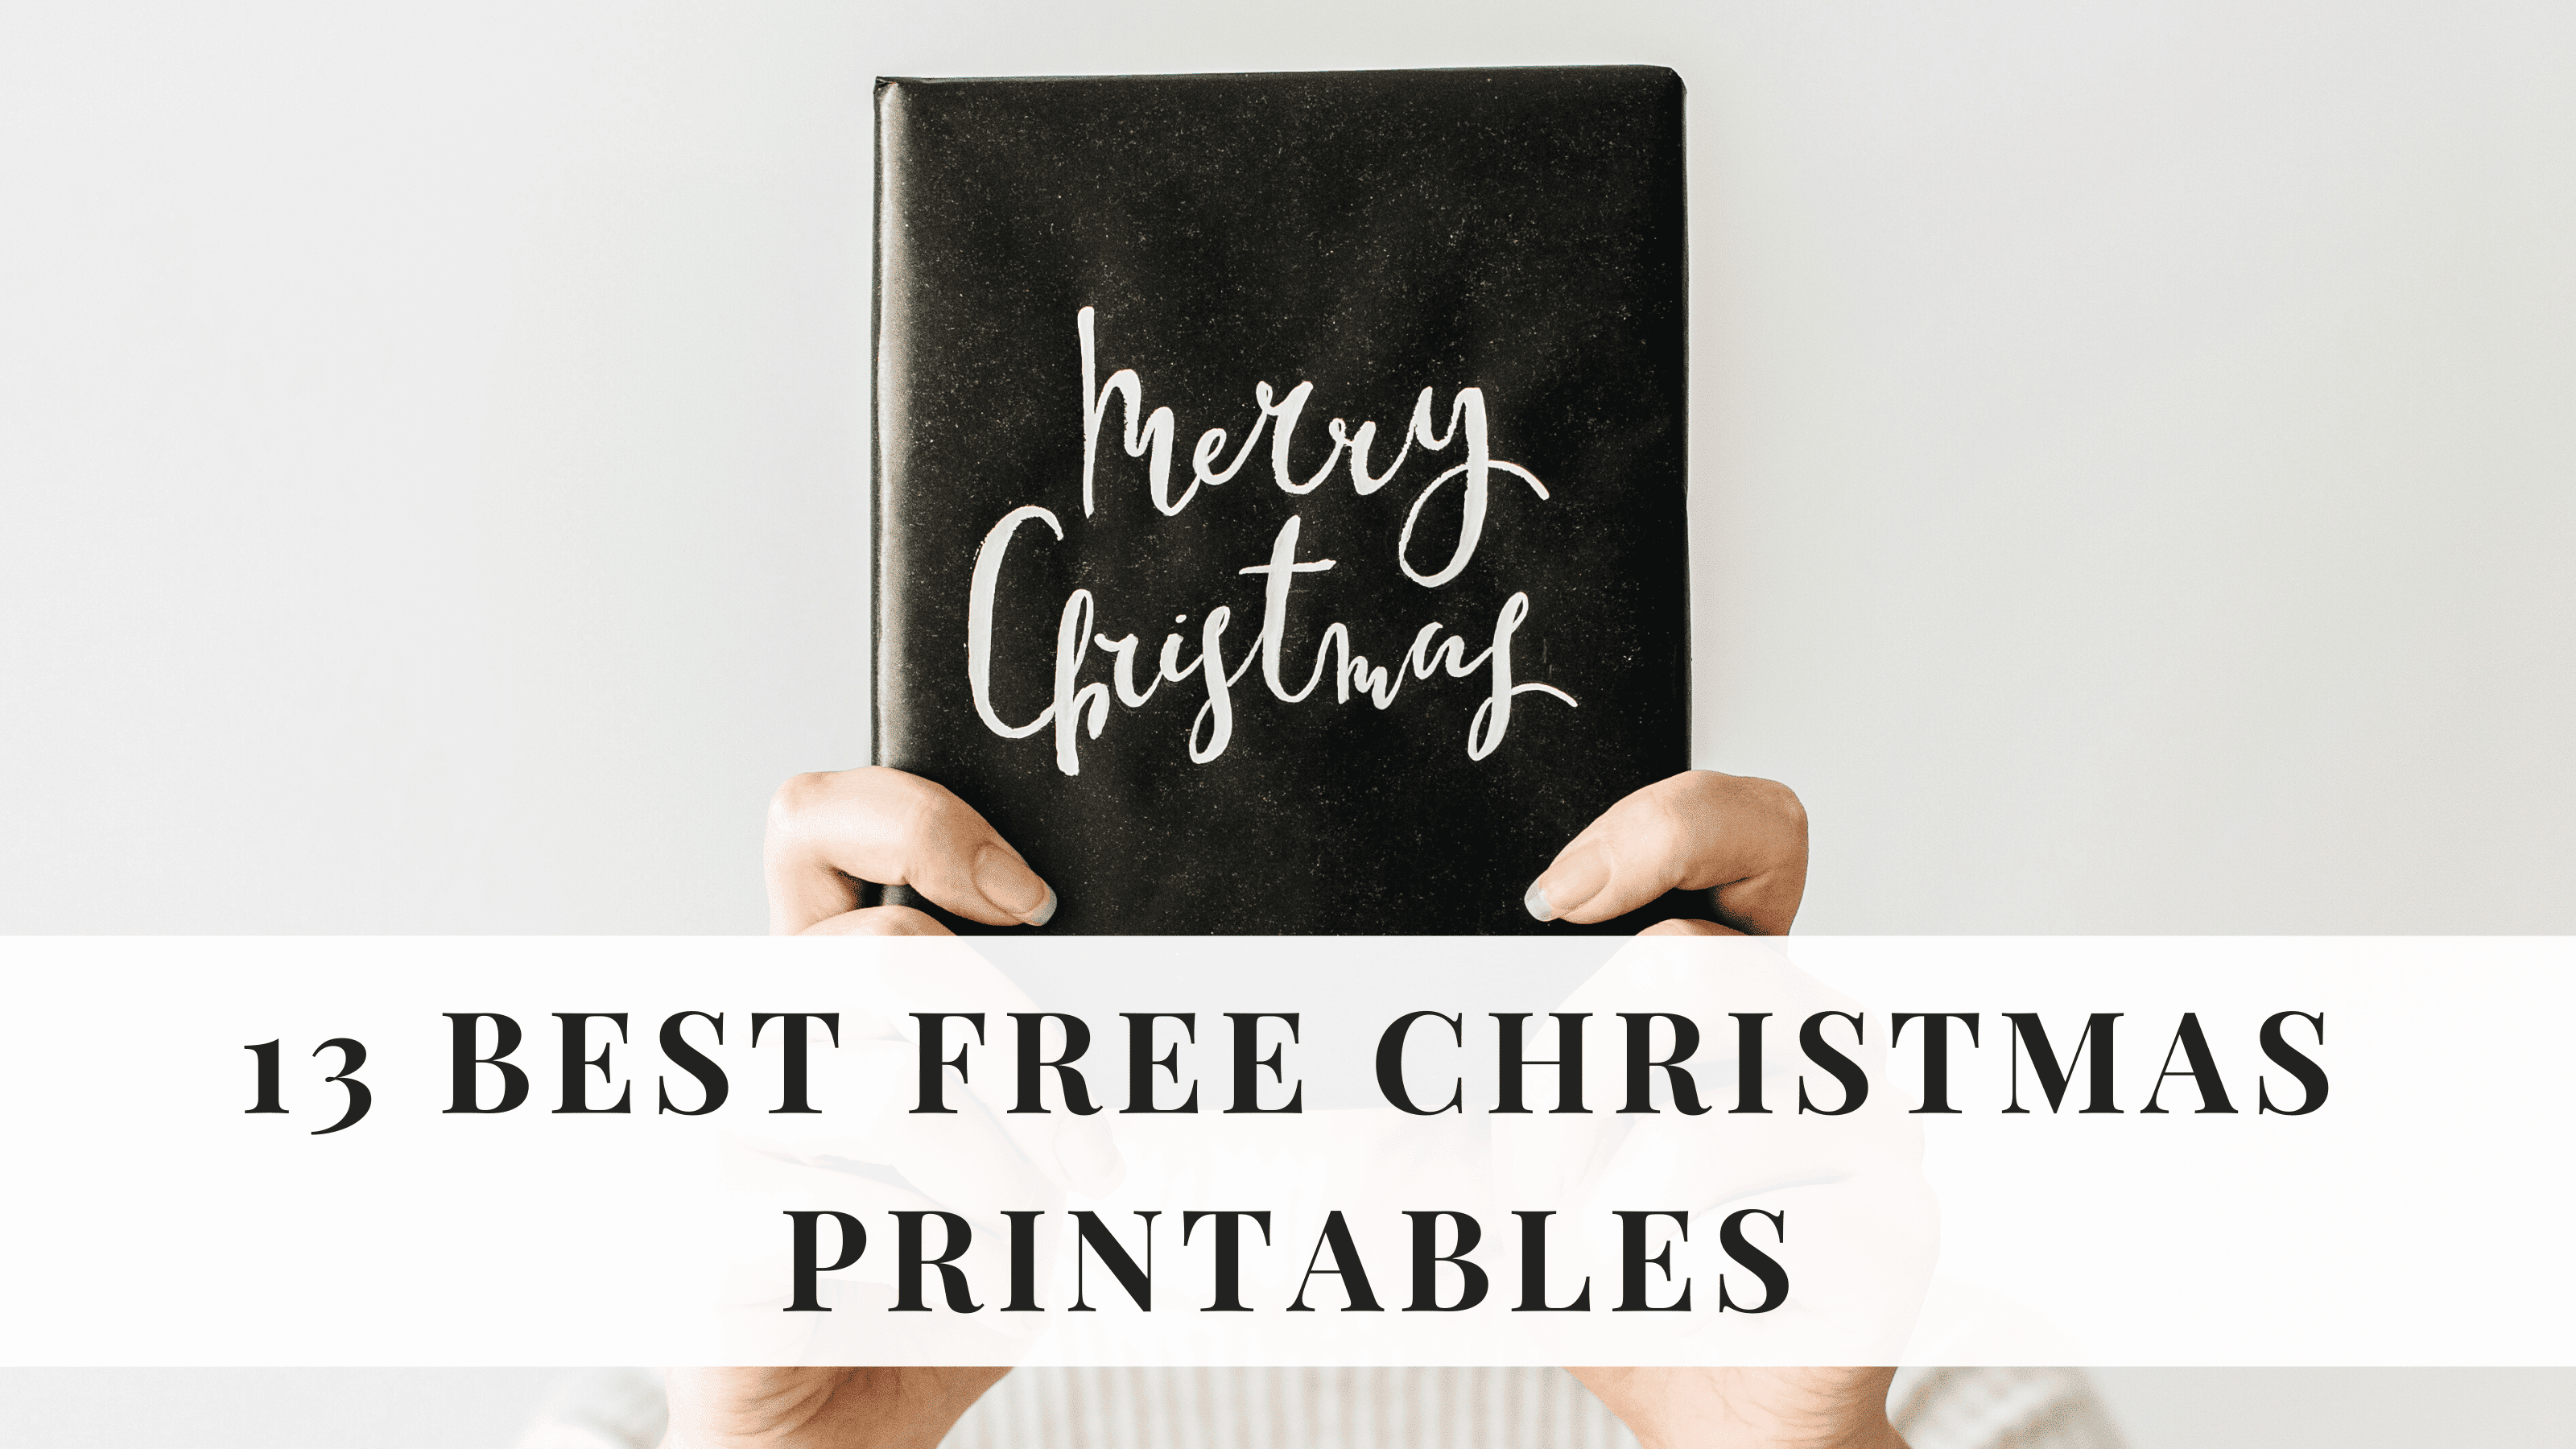 13 Free Christmas Printables We Re Obsessing Over By Sophia Lee